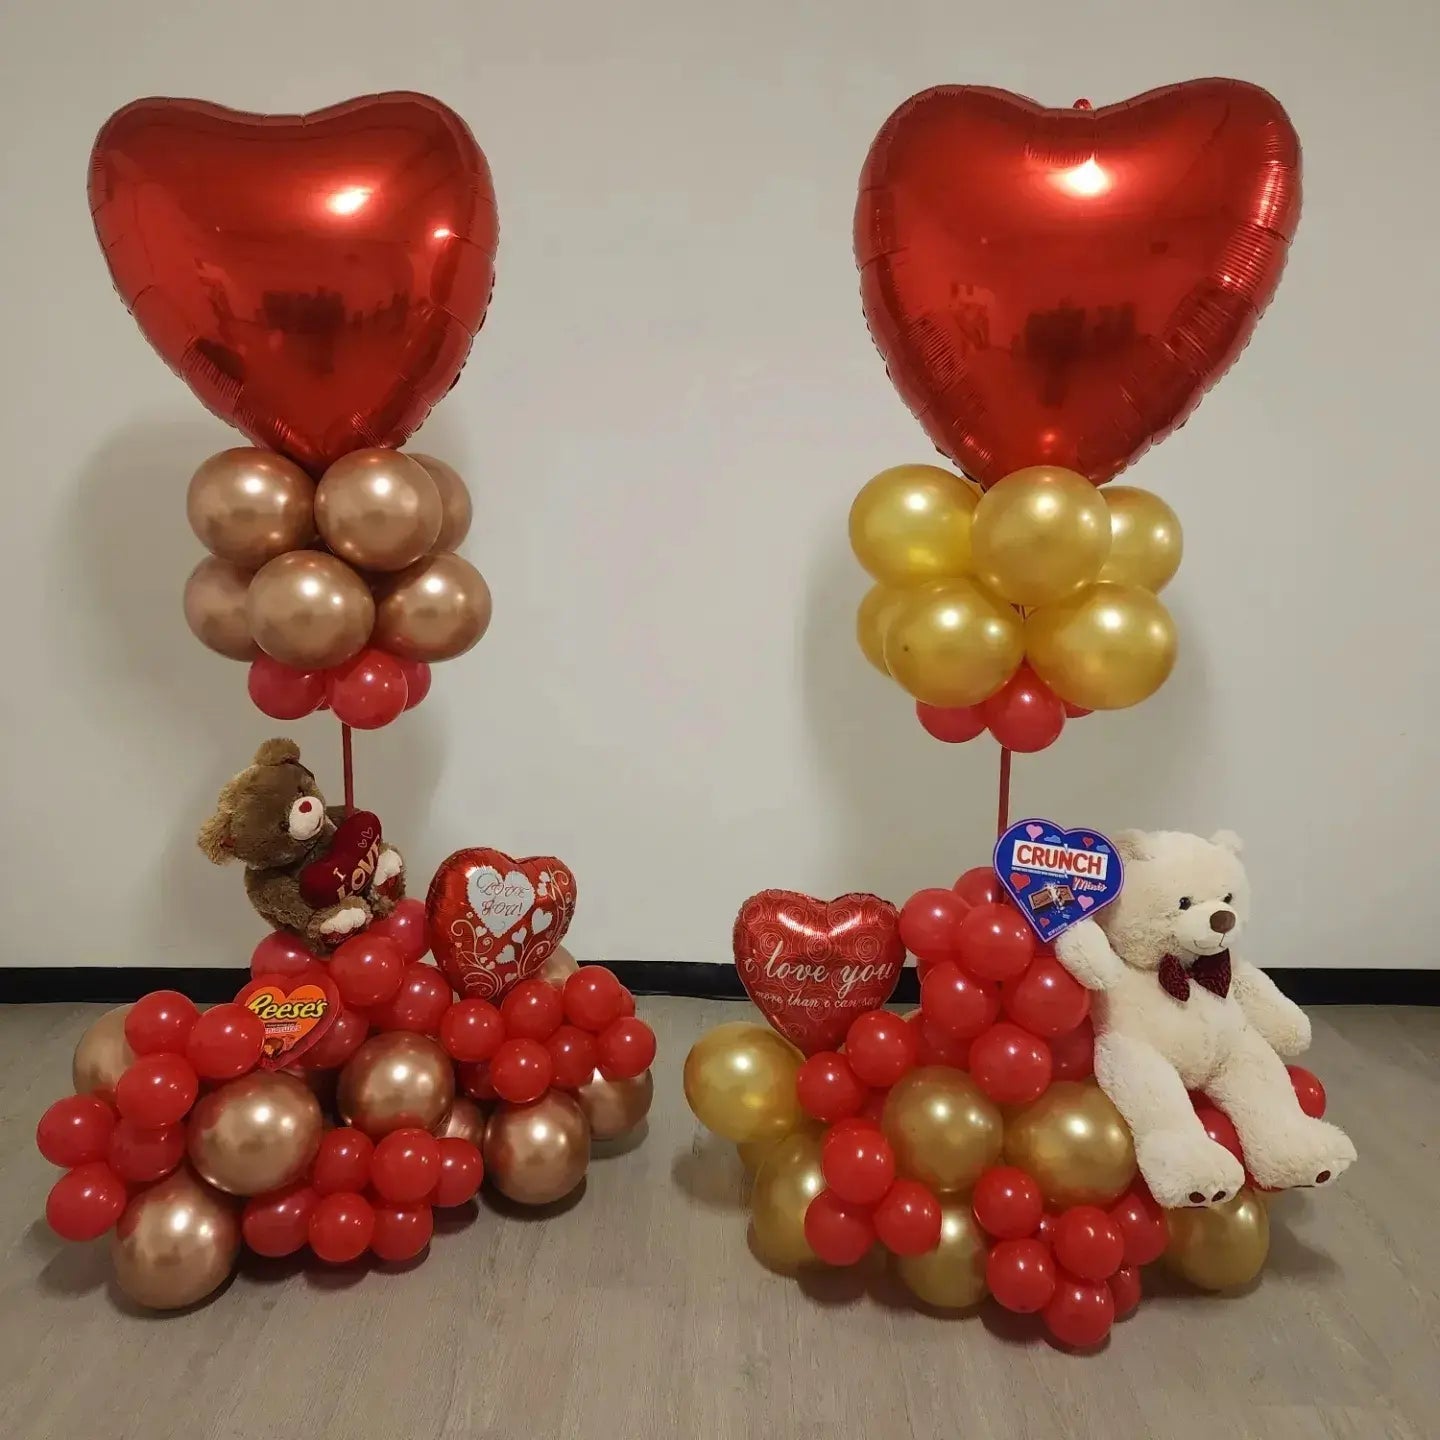 Special Balloons